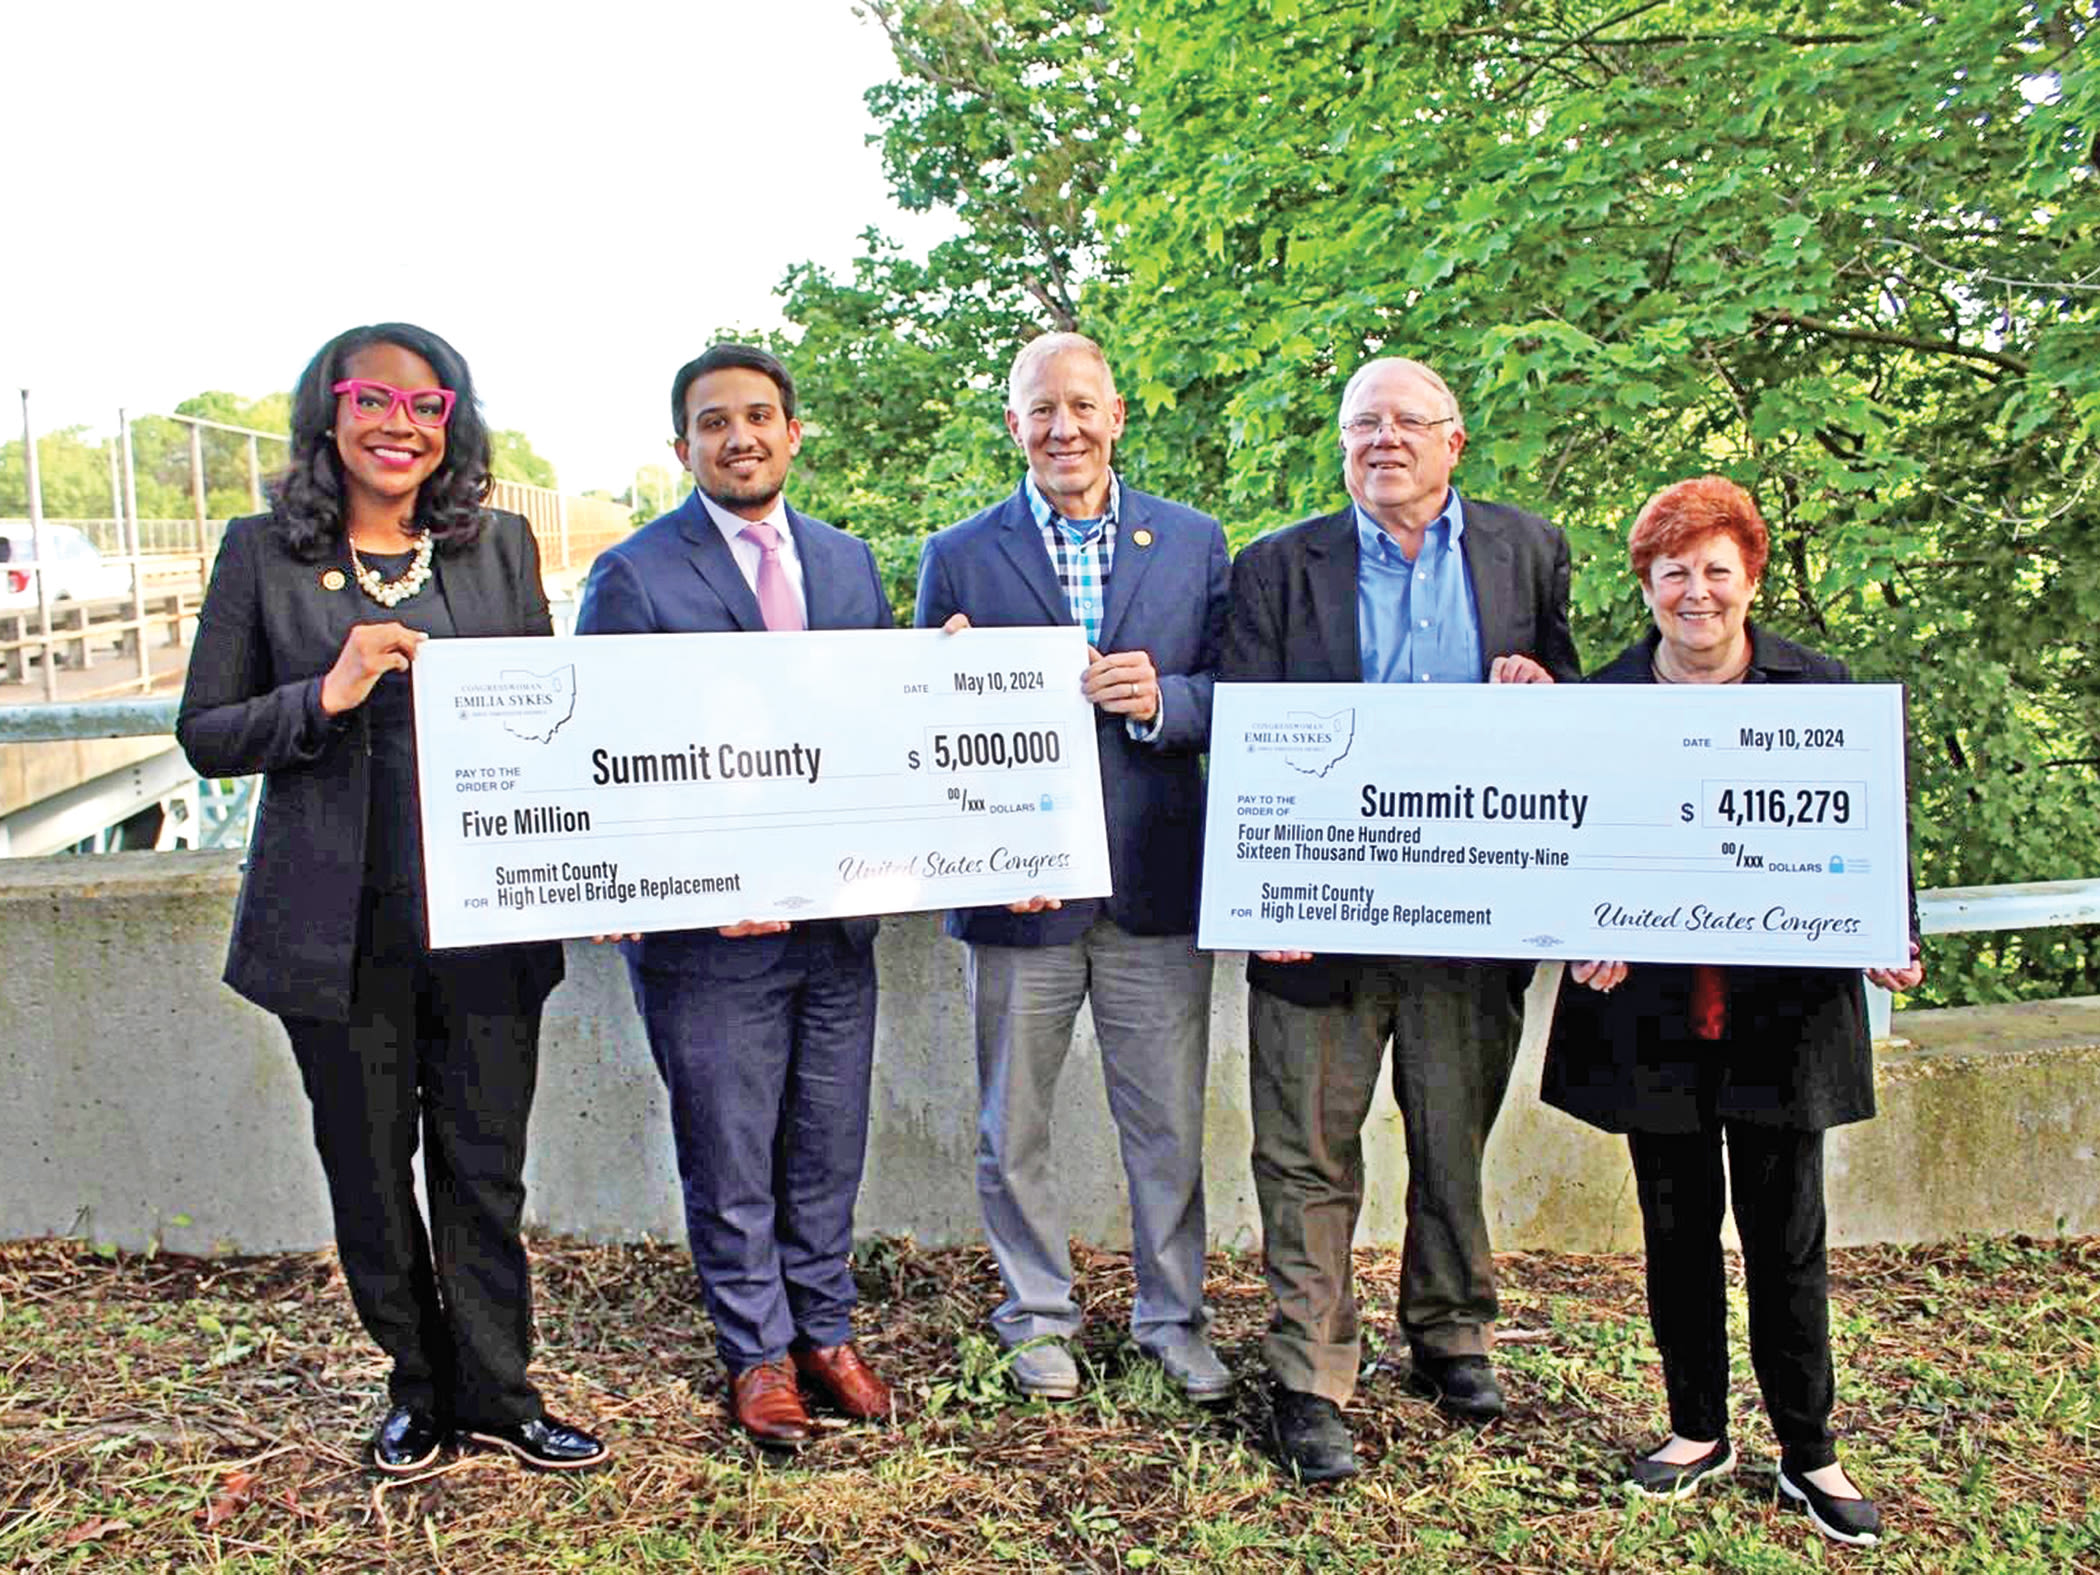 Rep. Sykes delivers $9.1 million to improve Summit County High Level Bridge - Akron.com